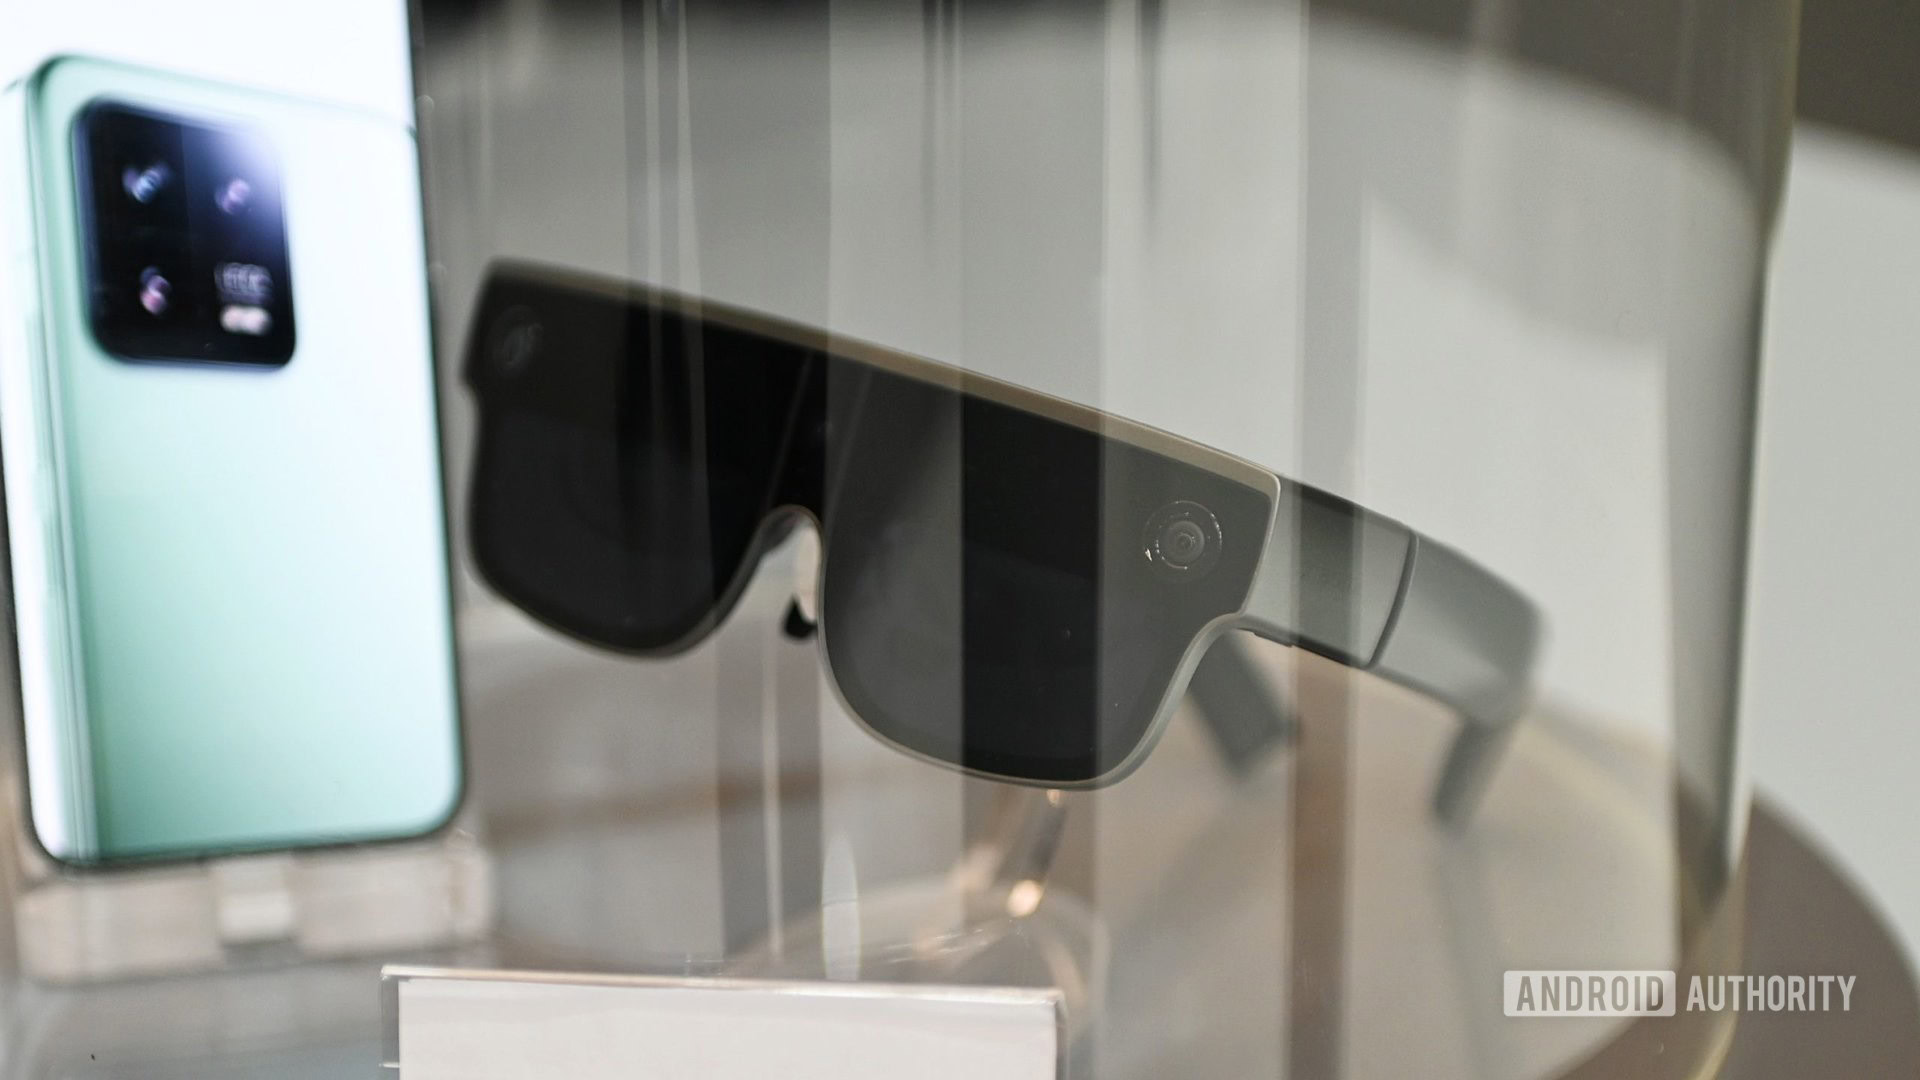 First look: Apple smart glasses may revolutionize augmented reality as soon  as 2025 - Future Apple Hardware Discussions on AppleInsider Forums